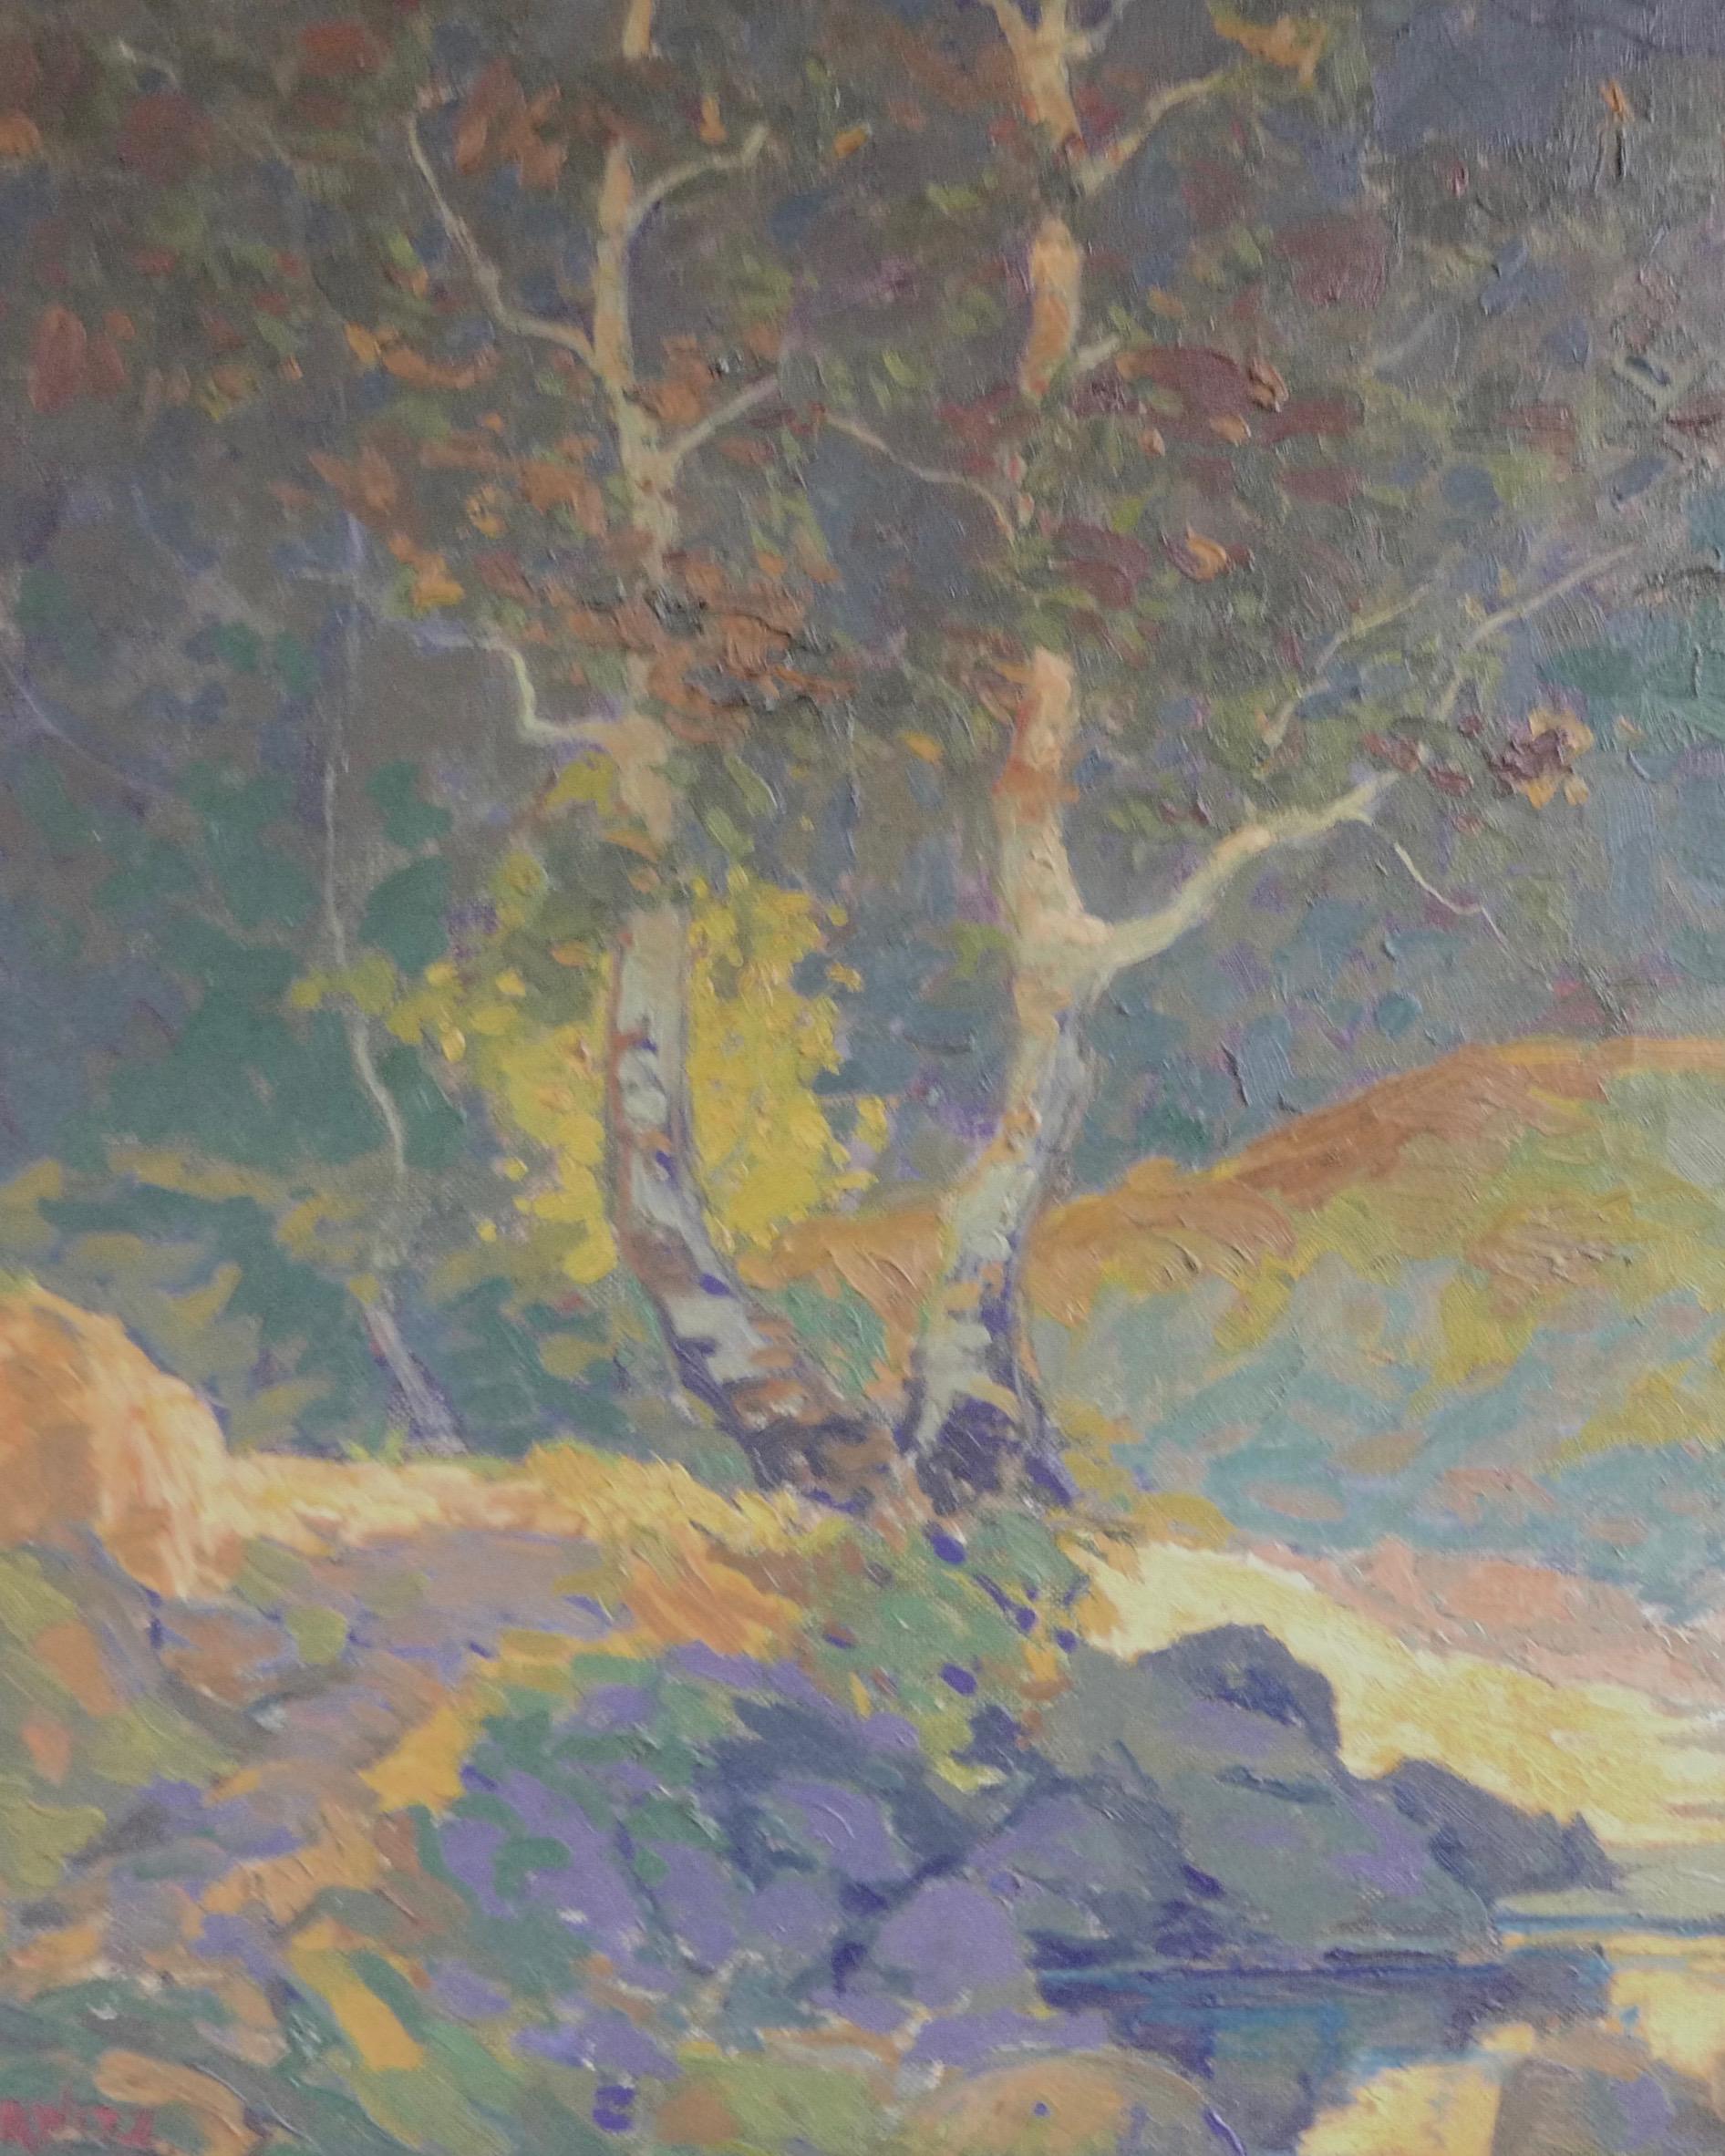 20th Century Abstract/ Impressionist Landscape by Russian/American William N. Horwitz, c 1924